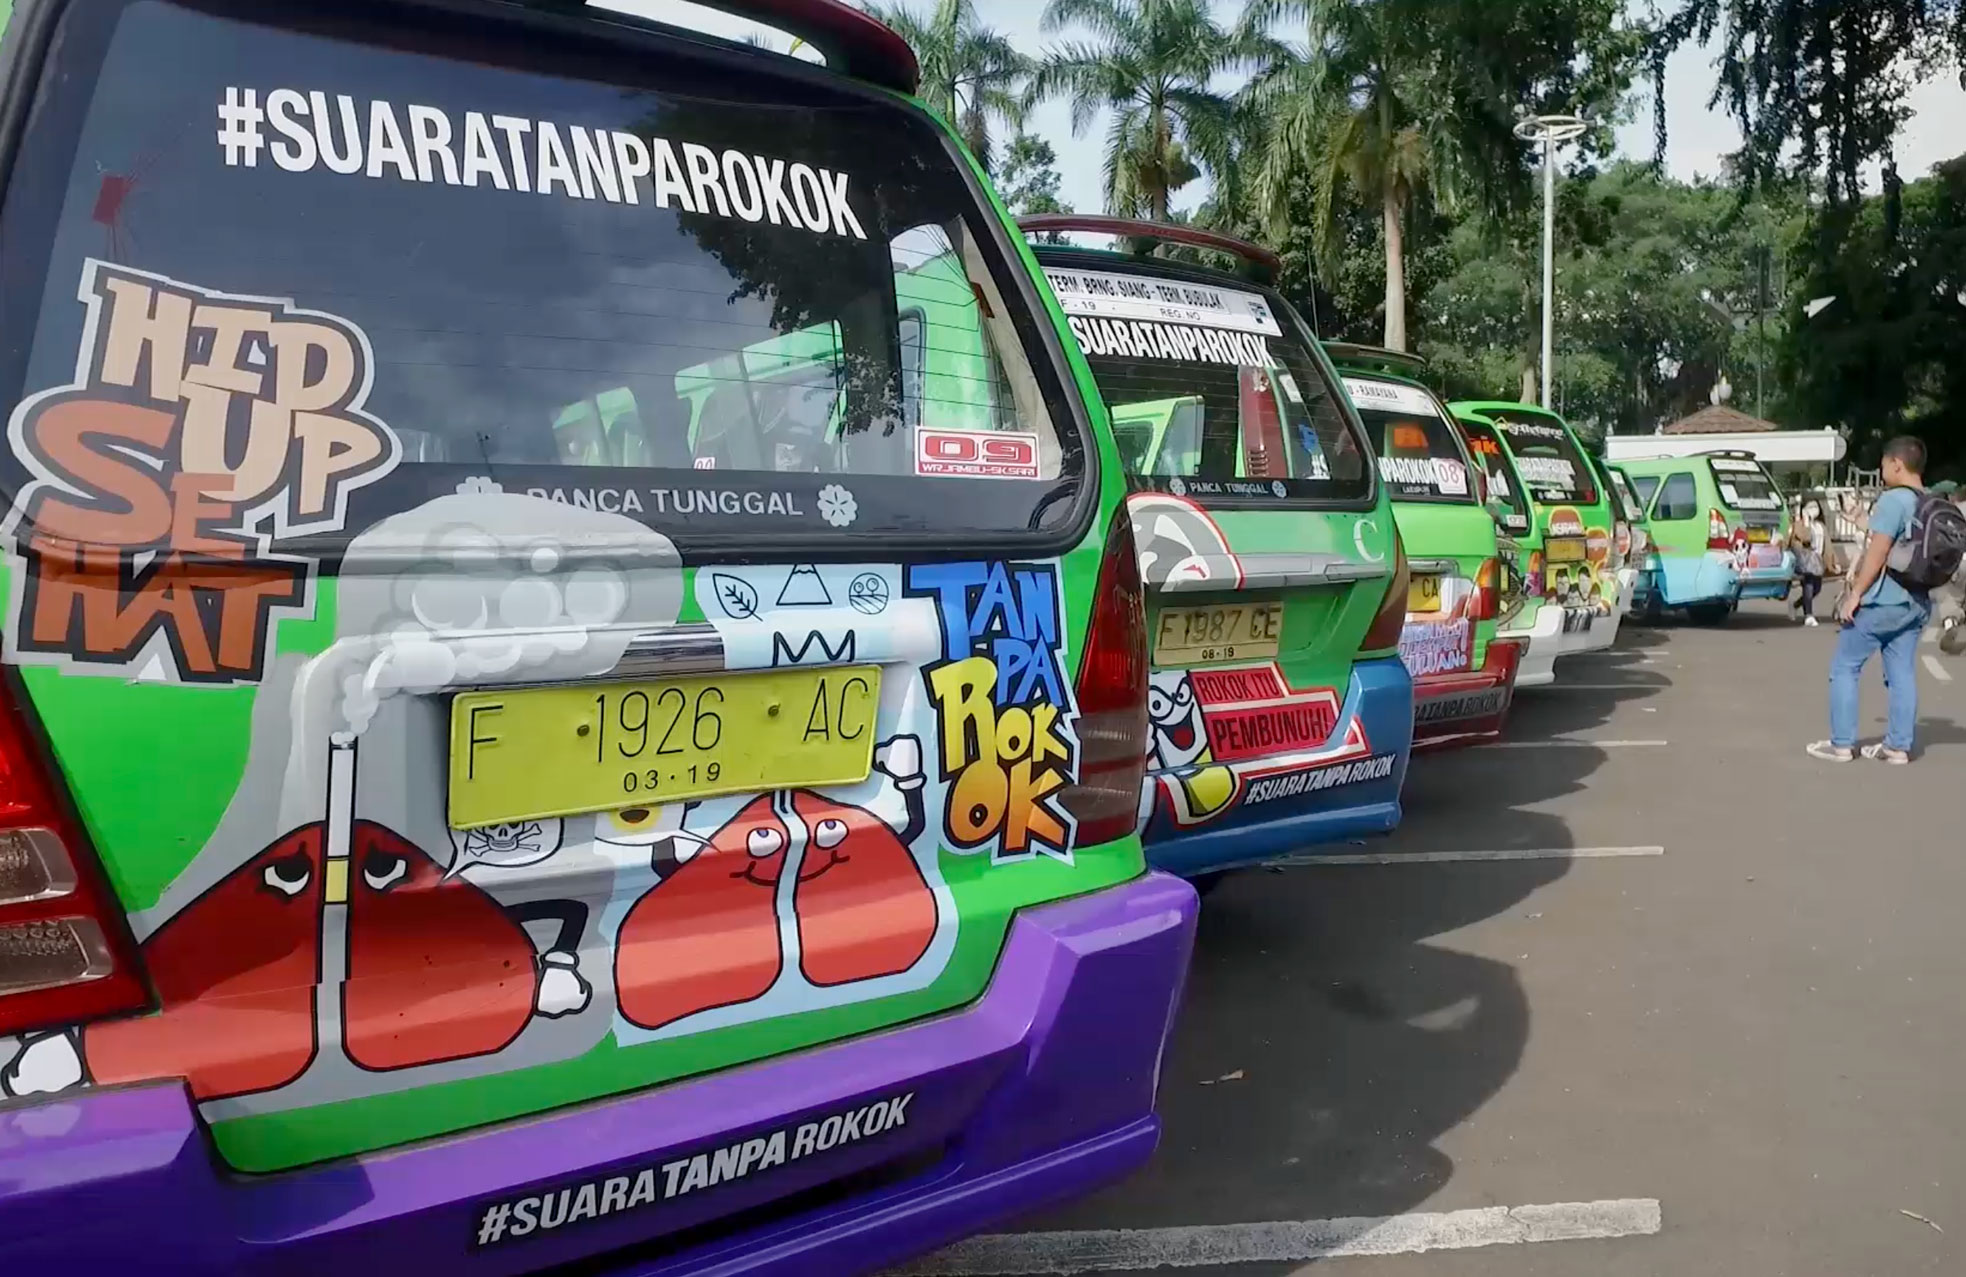 Health harm messages on minibuses in Bogor, Indonesia (World No Tobacco Day, 2017) as part of the #SuaraTanpaRokok (Voices Without Cigarettes) campaign to enforce smoke free public transportation.